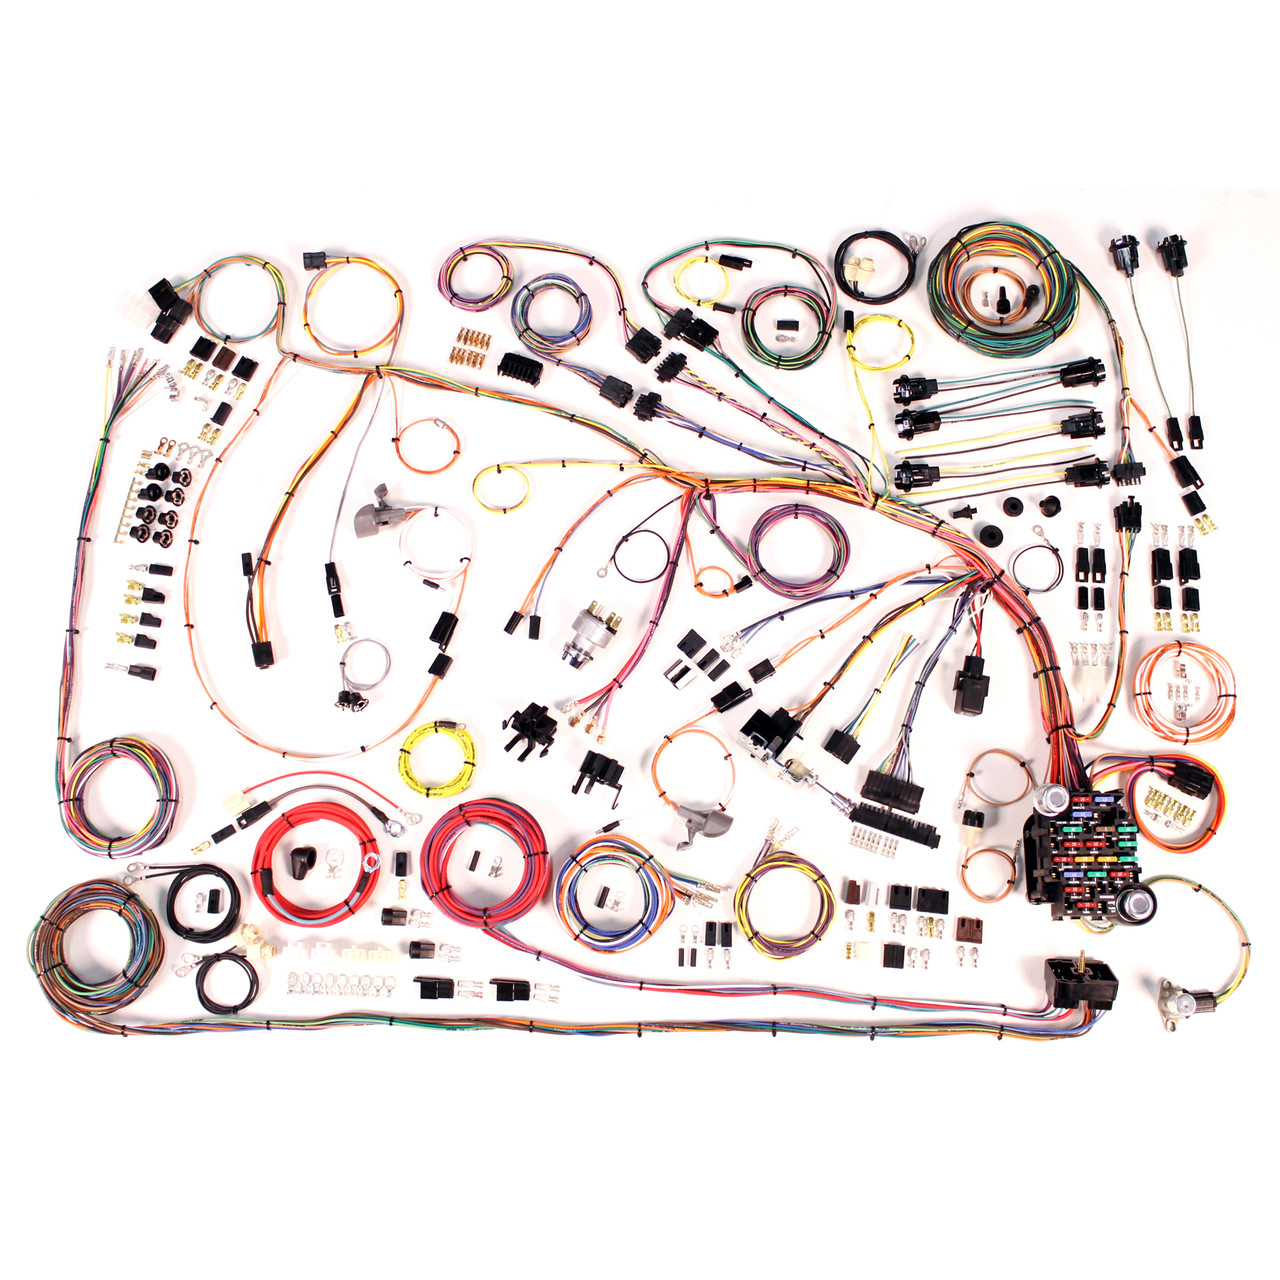 American Autowire 1966-1968 Chevrolet Impala "Classic Update" Complete Wiring Kit (AME-510372)